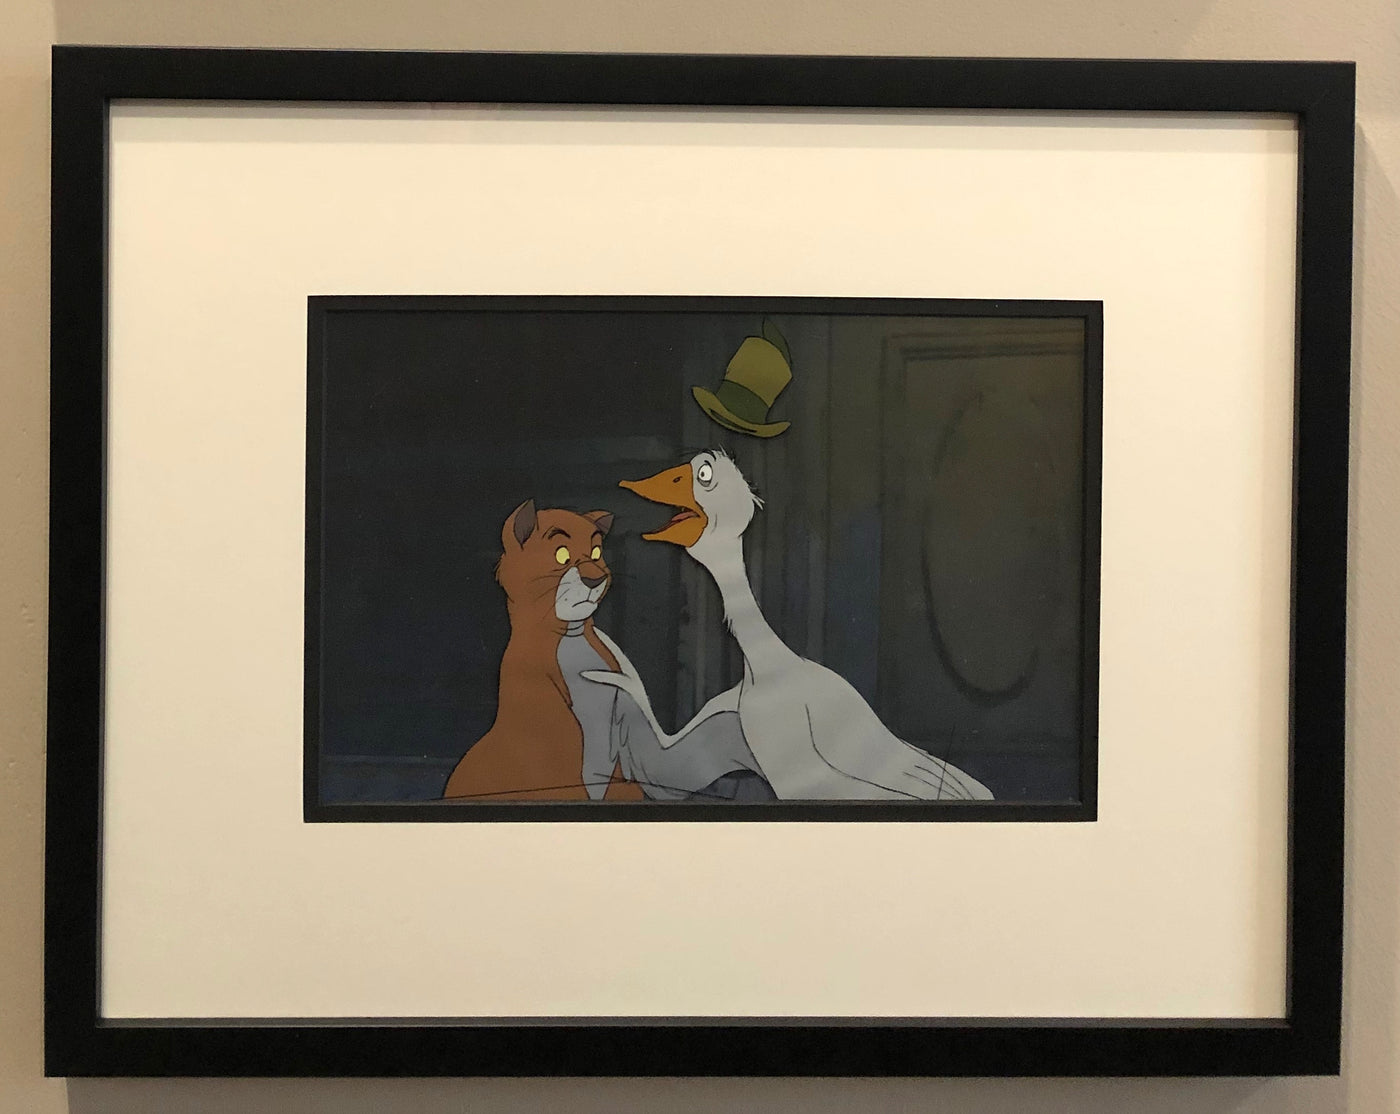 Original Walt Disney Production Cel from The Aristocats featuring Thomas O'Malley and Uncle Waldo